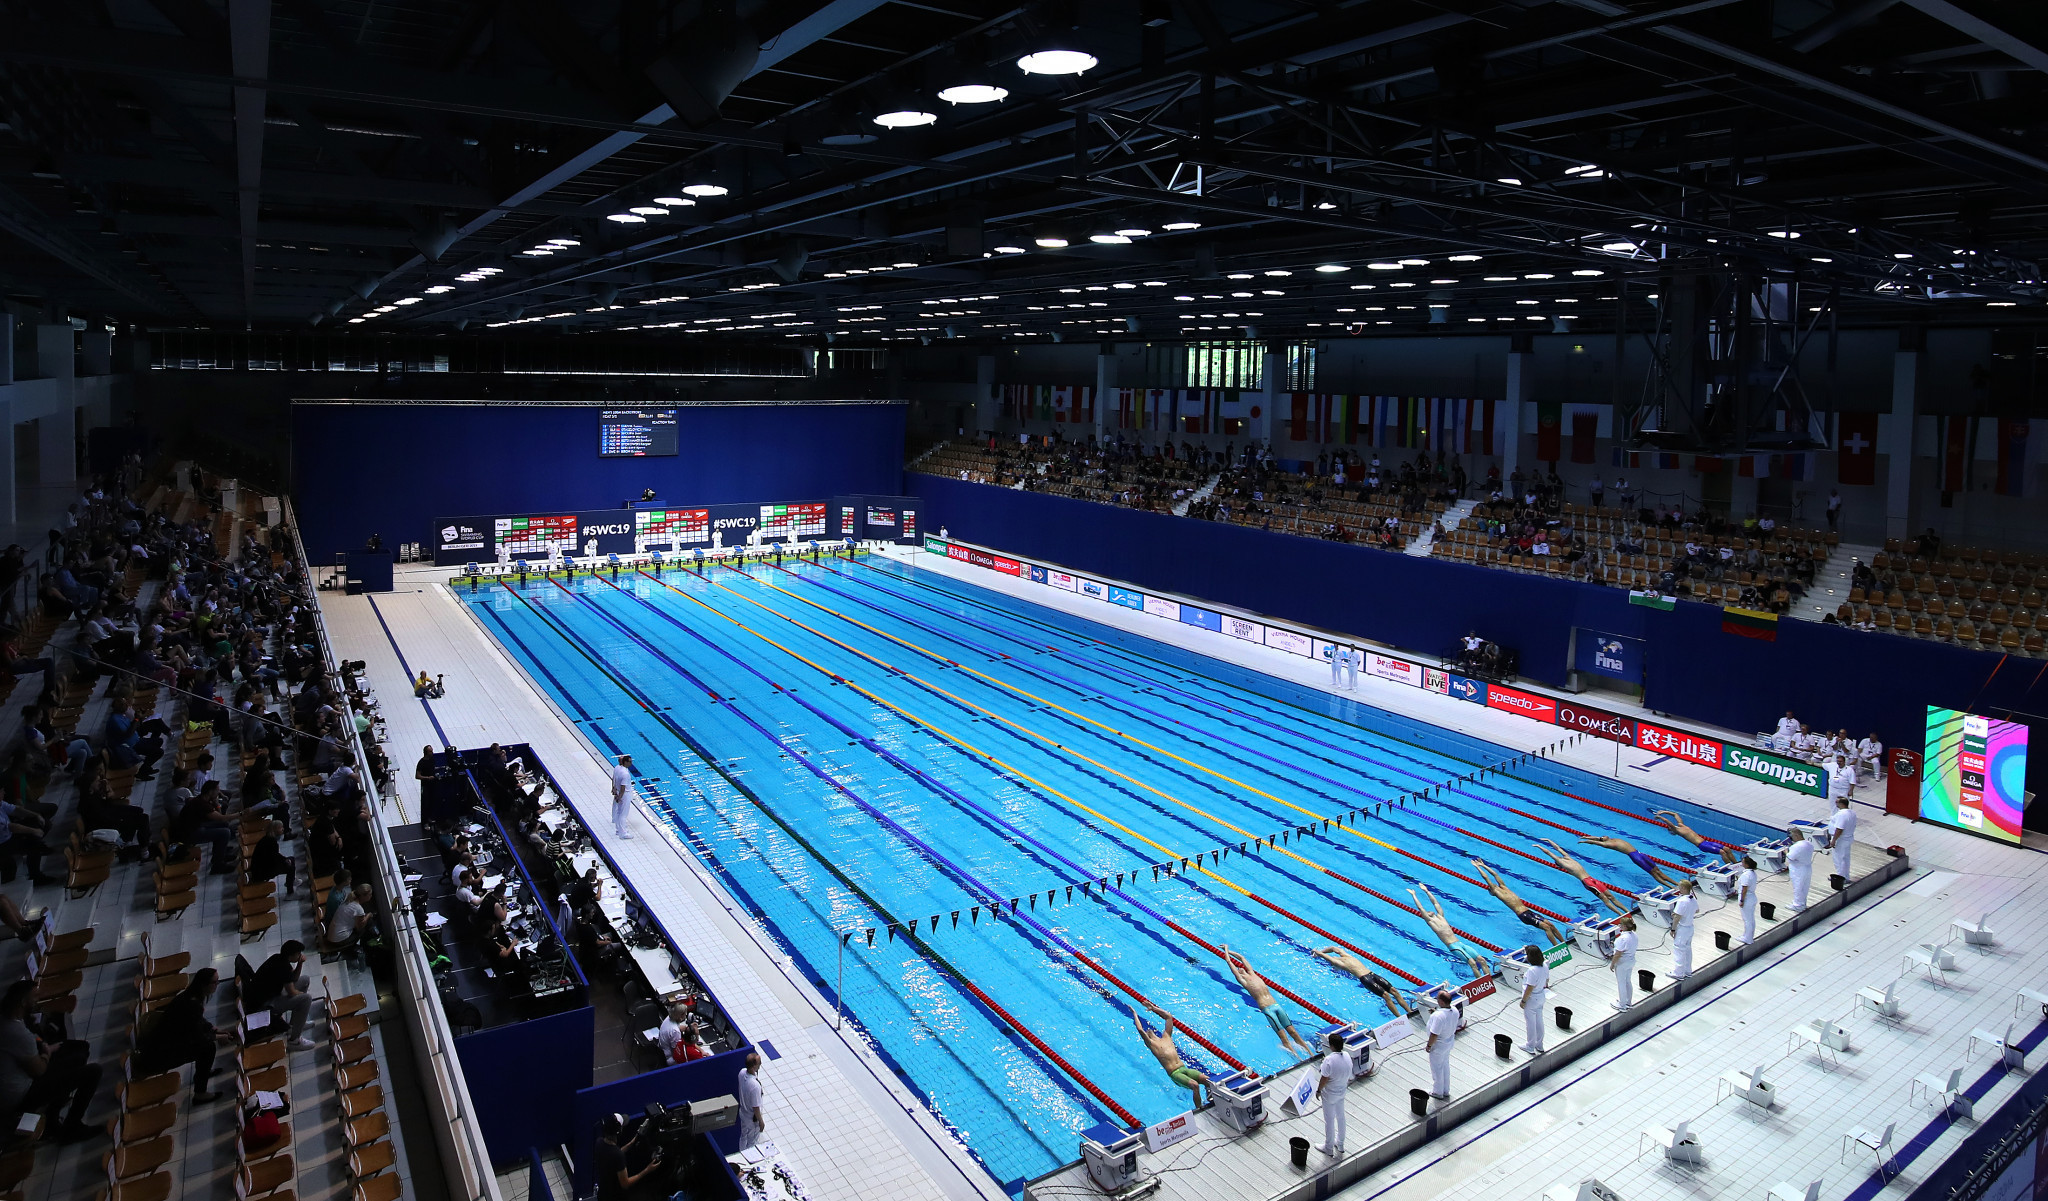 The Schwimm- und Sprunghalle in Berlin is set to host the fourth leg of the 2022 World Para Swimming World Series ©Getty Images